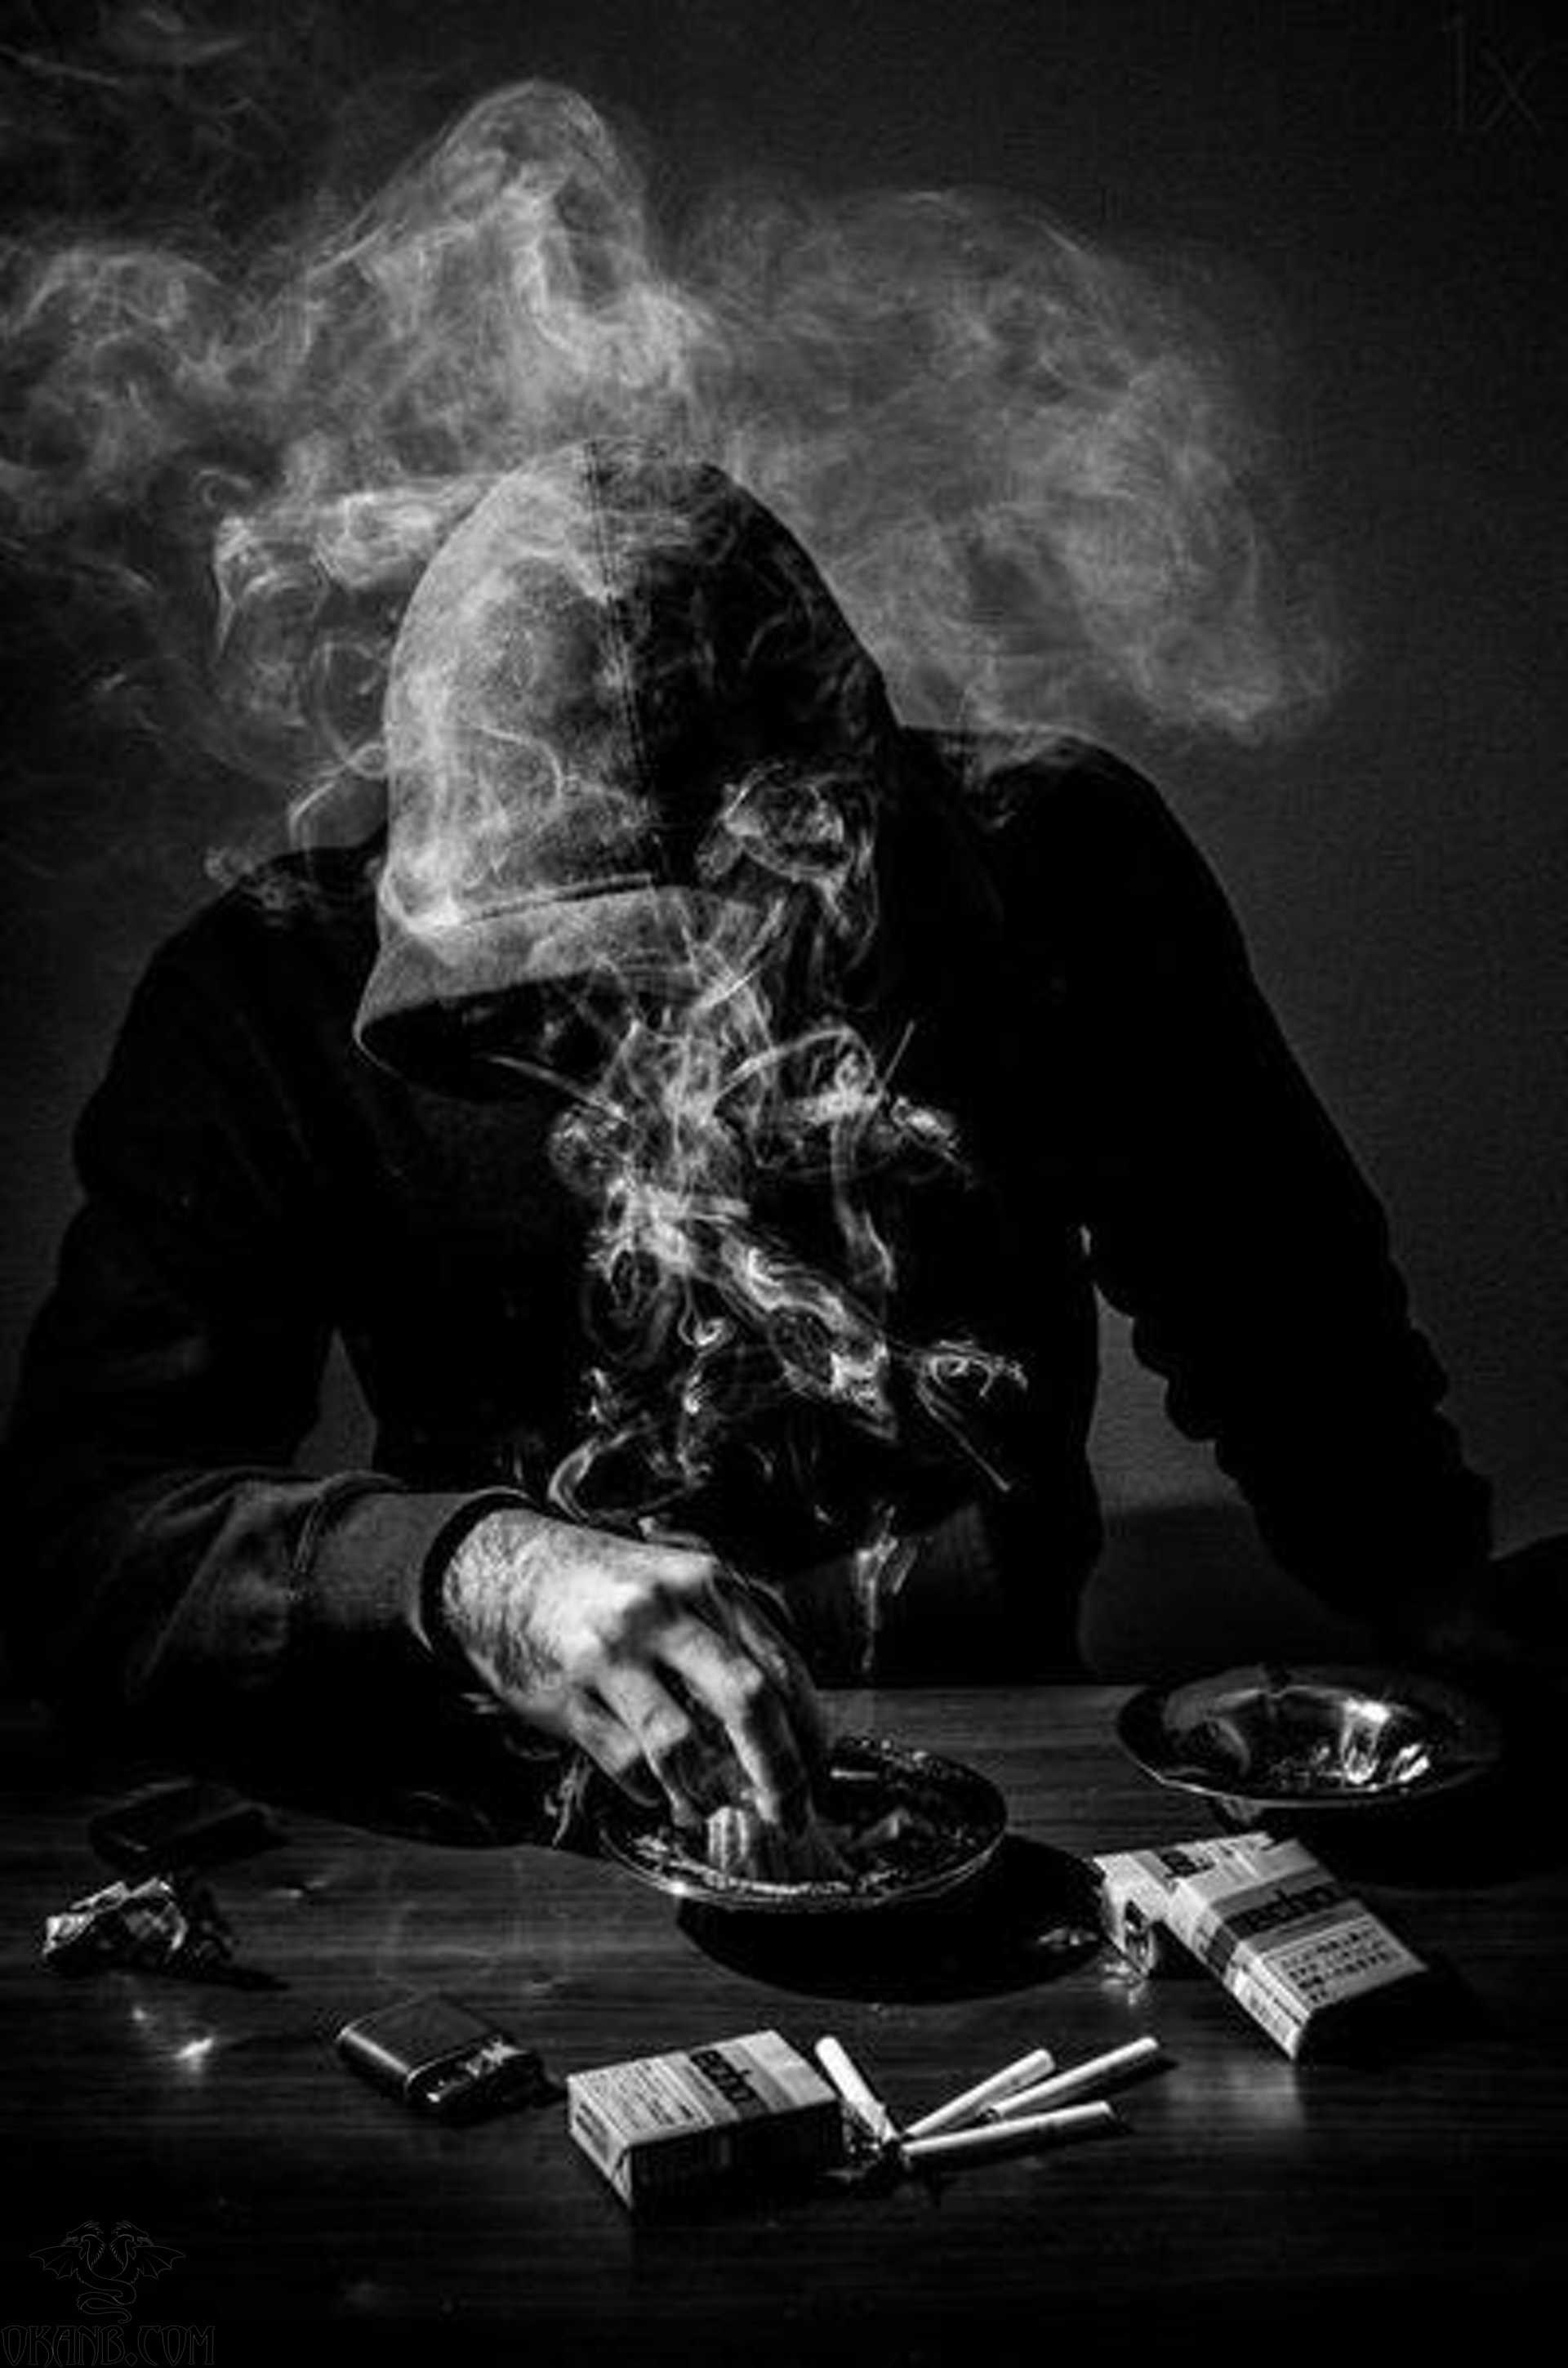 A hooded figure sits at a table, surrounded by cigarette smoke and ashtray - Gangster